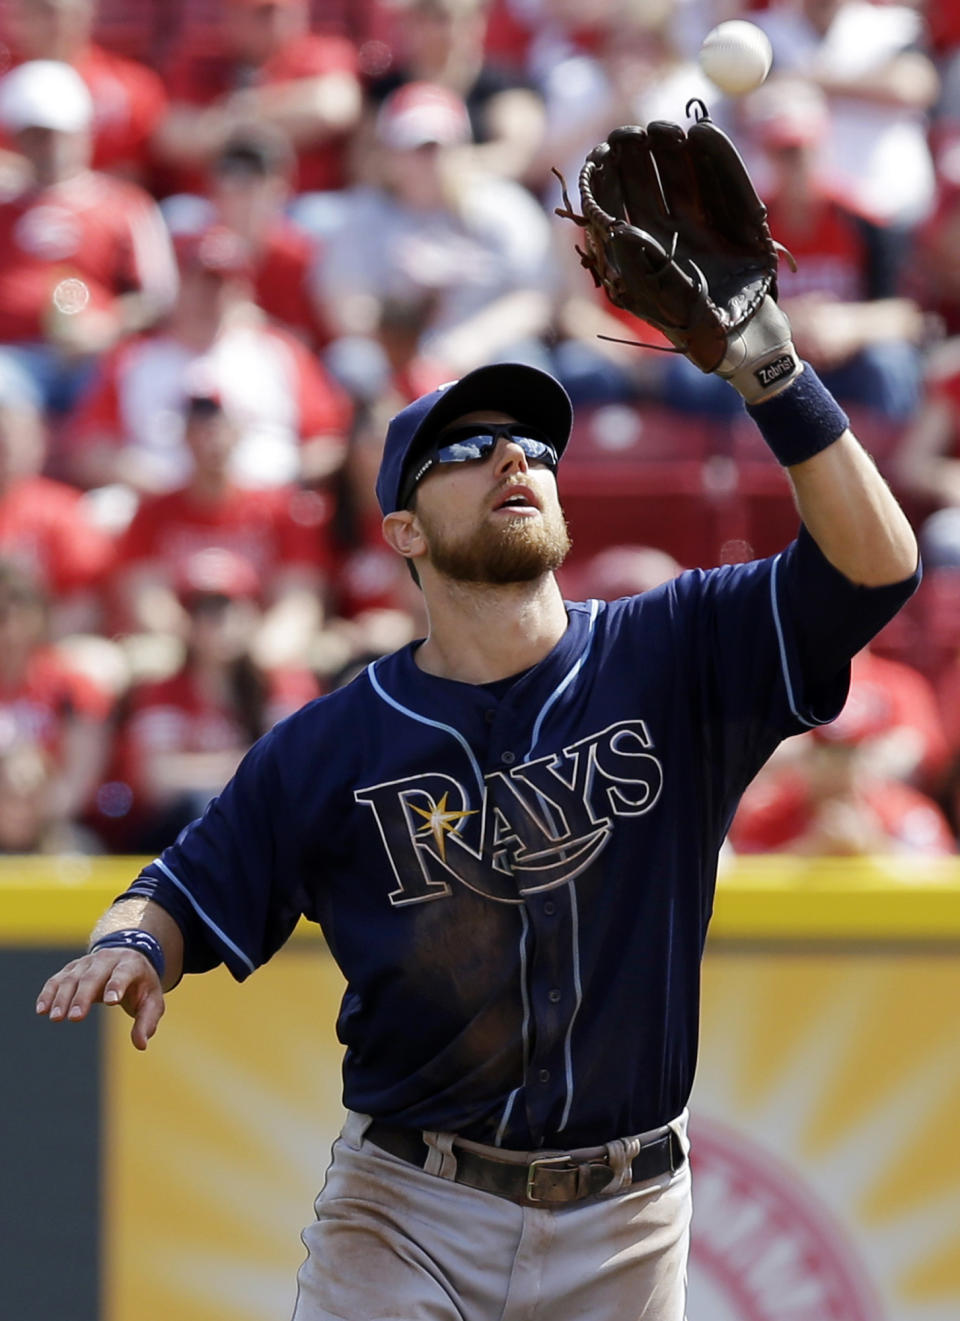 Tampa Bay Rays second baseman Ben Zobrist catches a pop fly hit by Cincinnati Reds' Chris Heisey in the eighth inning of a baseball game, Saturday, April 12, 2014, in Cincinnati. Tampa Bay won 1-0. (AP Photo/Al Behrman)